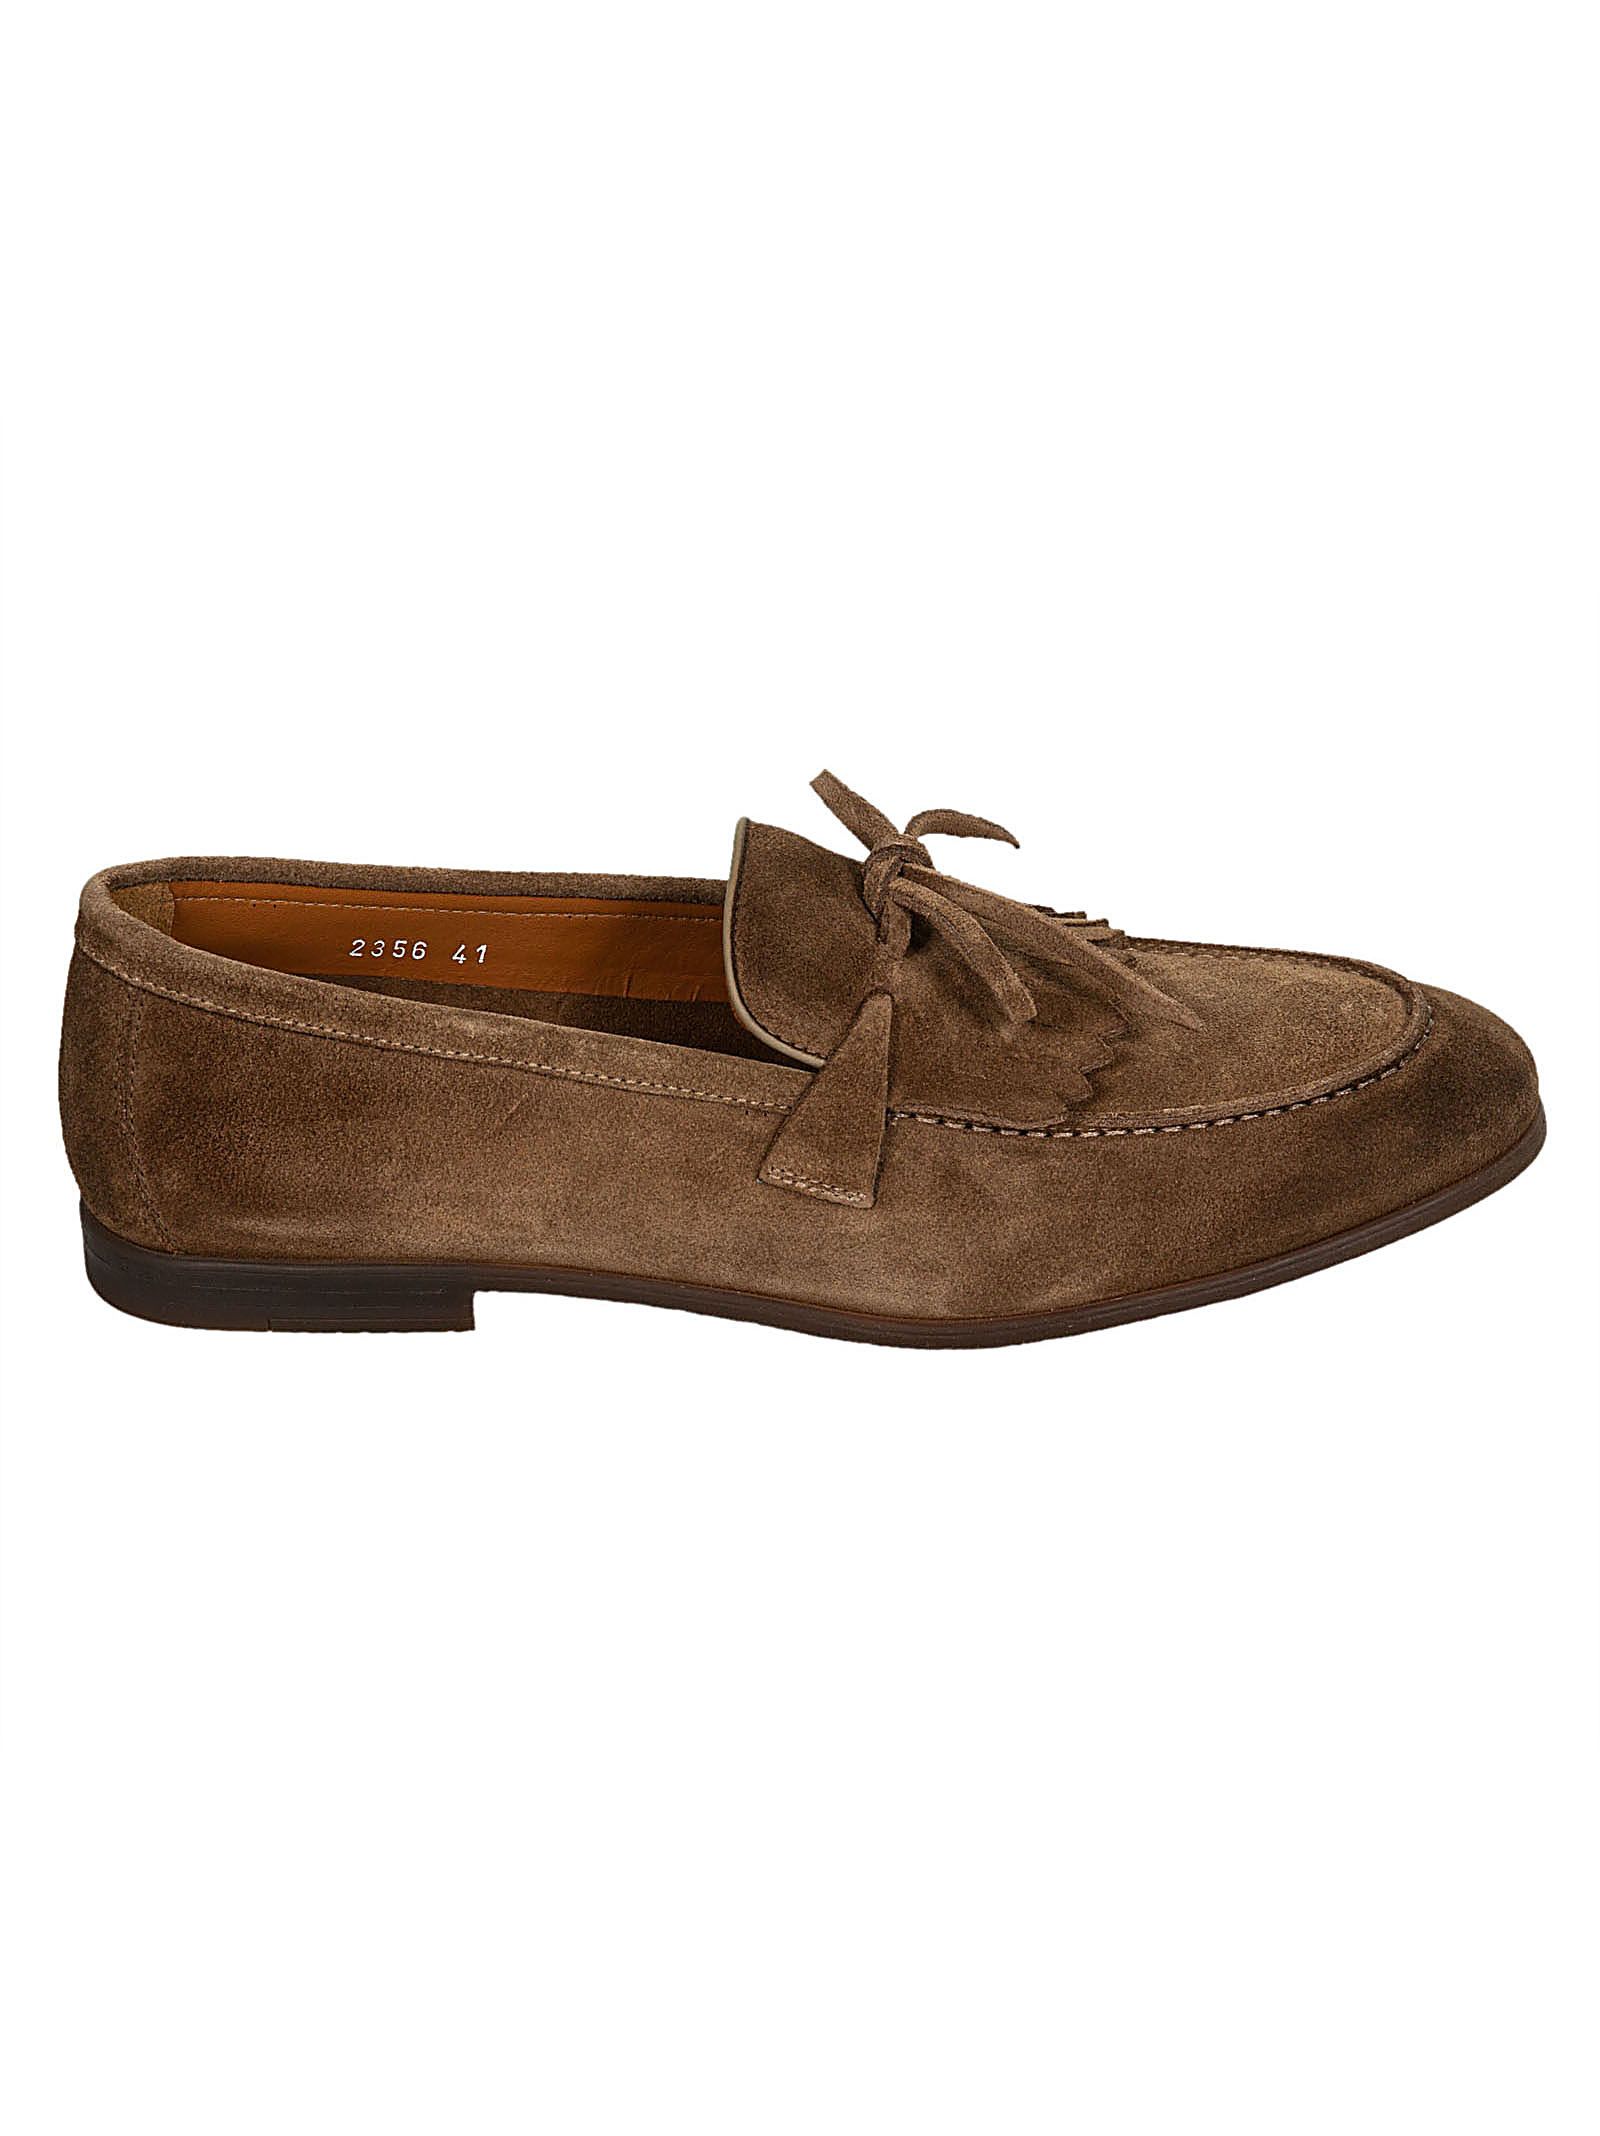 Doucal's Loafers \u0026 Boat Shoes | italist 